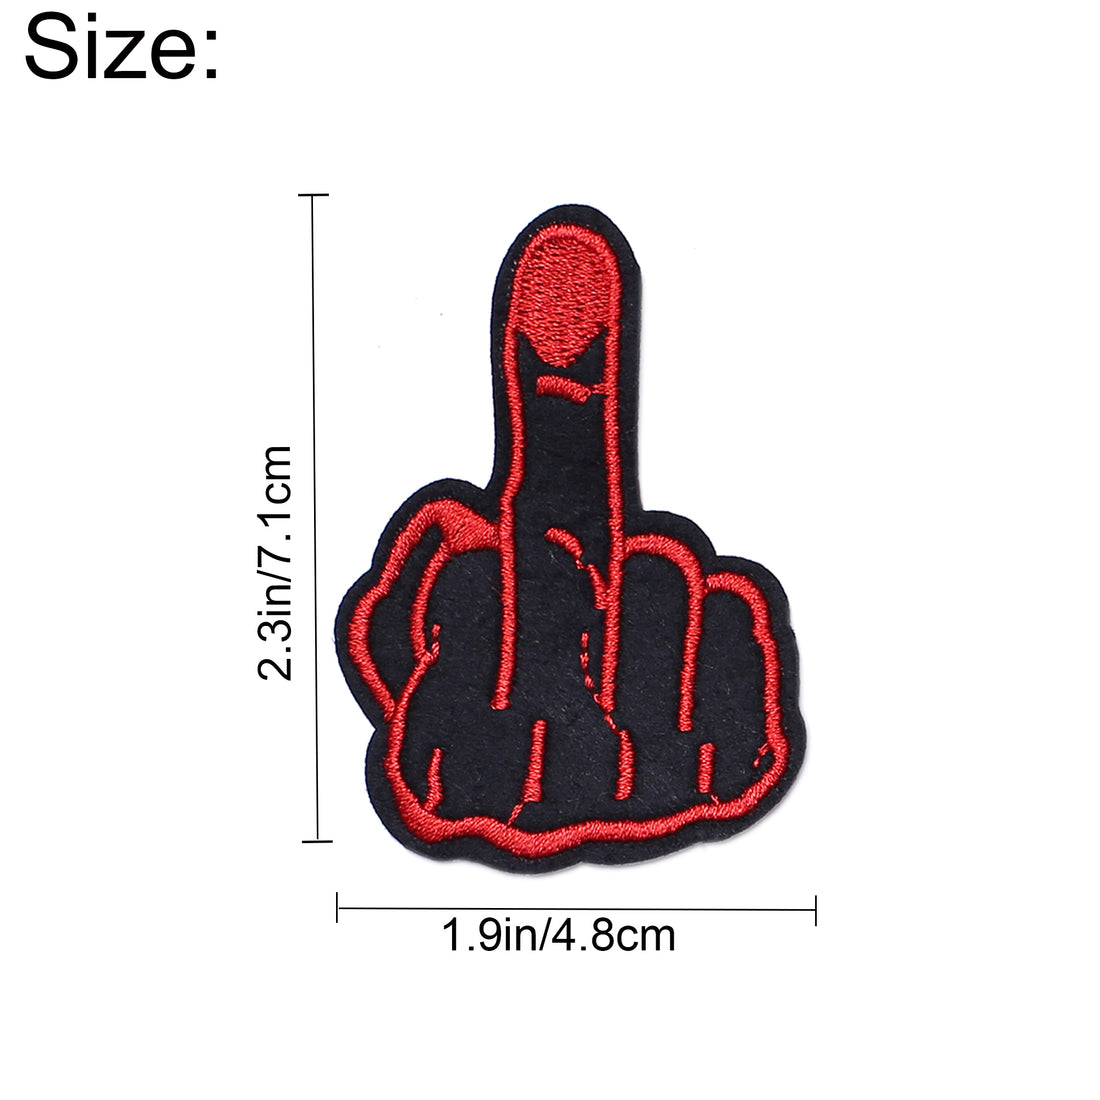 5Pcs Middle Finger Embroidered Iron on Patch for Clothes, Iron-on Patches / Sew-on Appliques Patches for Clothing, Jackets, Backpacks, Caps, Jeans